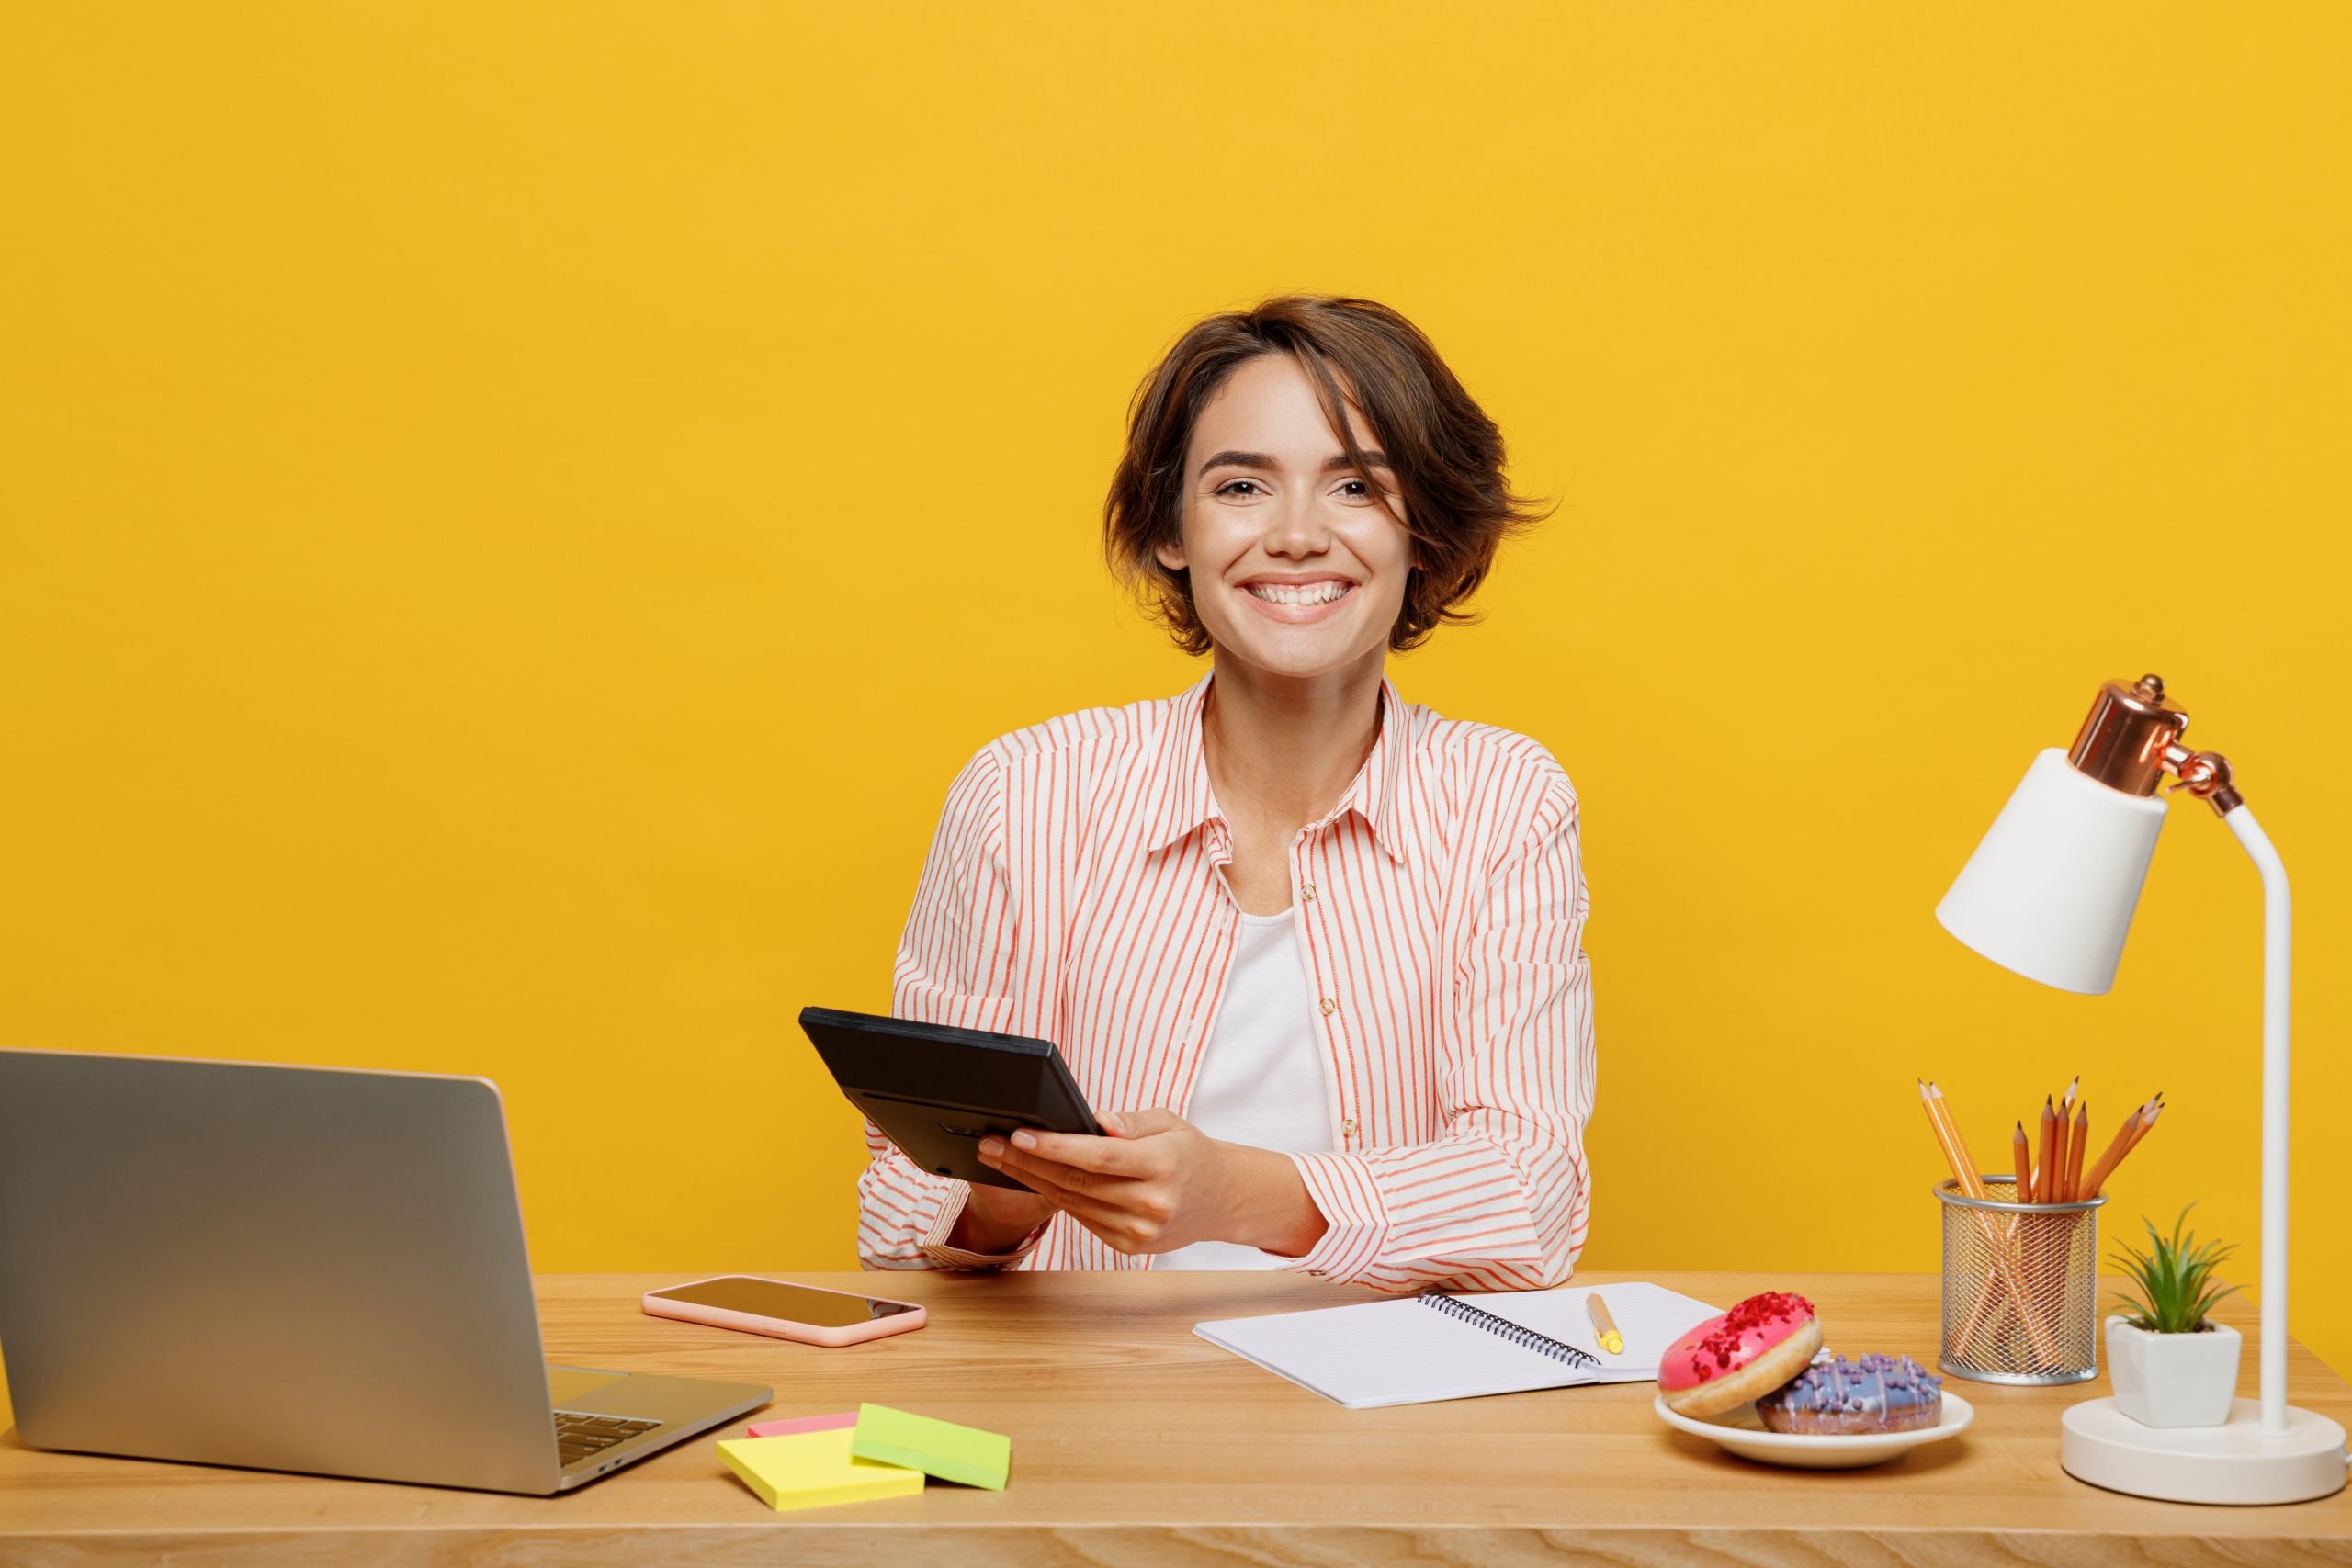 Young fun successful happy employee business woman wear casual shirt sit work at office desk with pc laptop use calculator write isolated on plain yellow color background. Achievement career concept